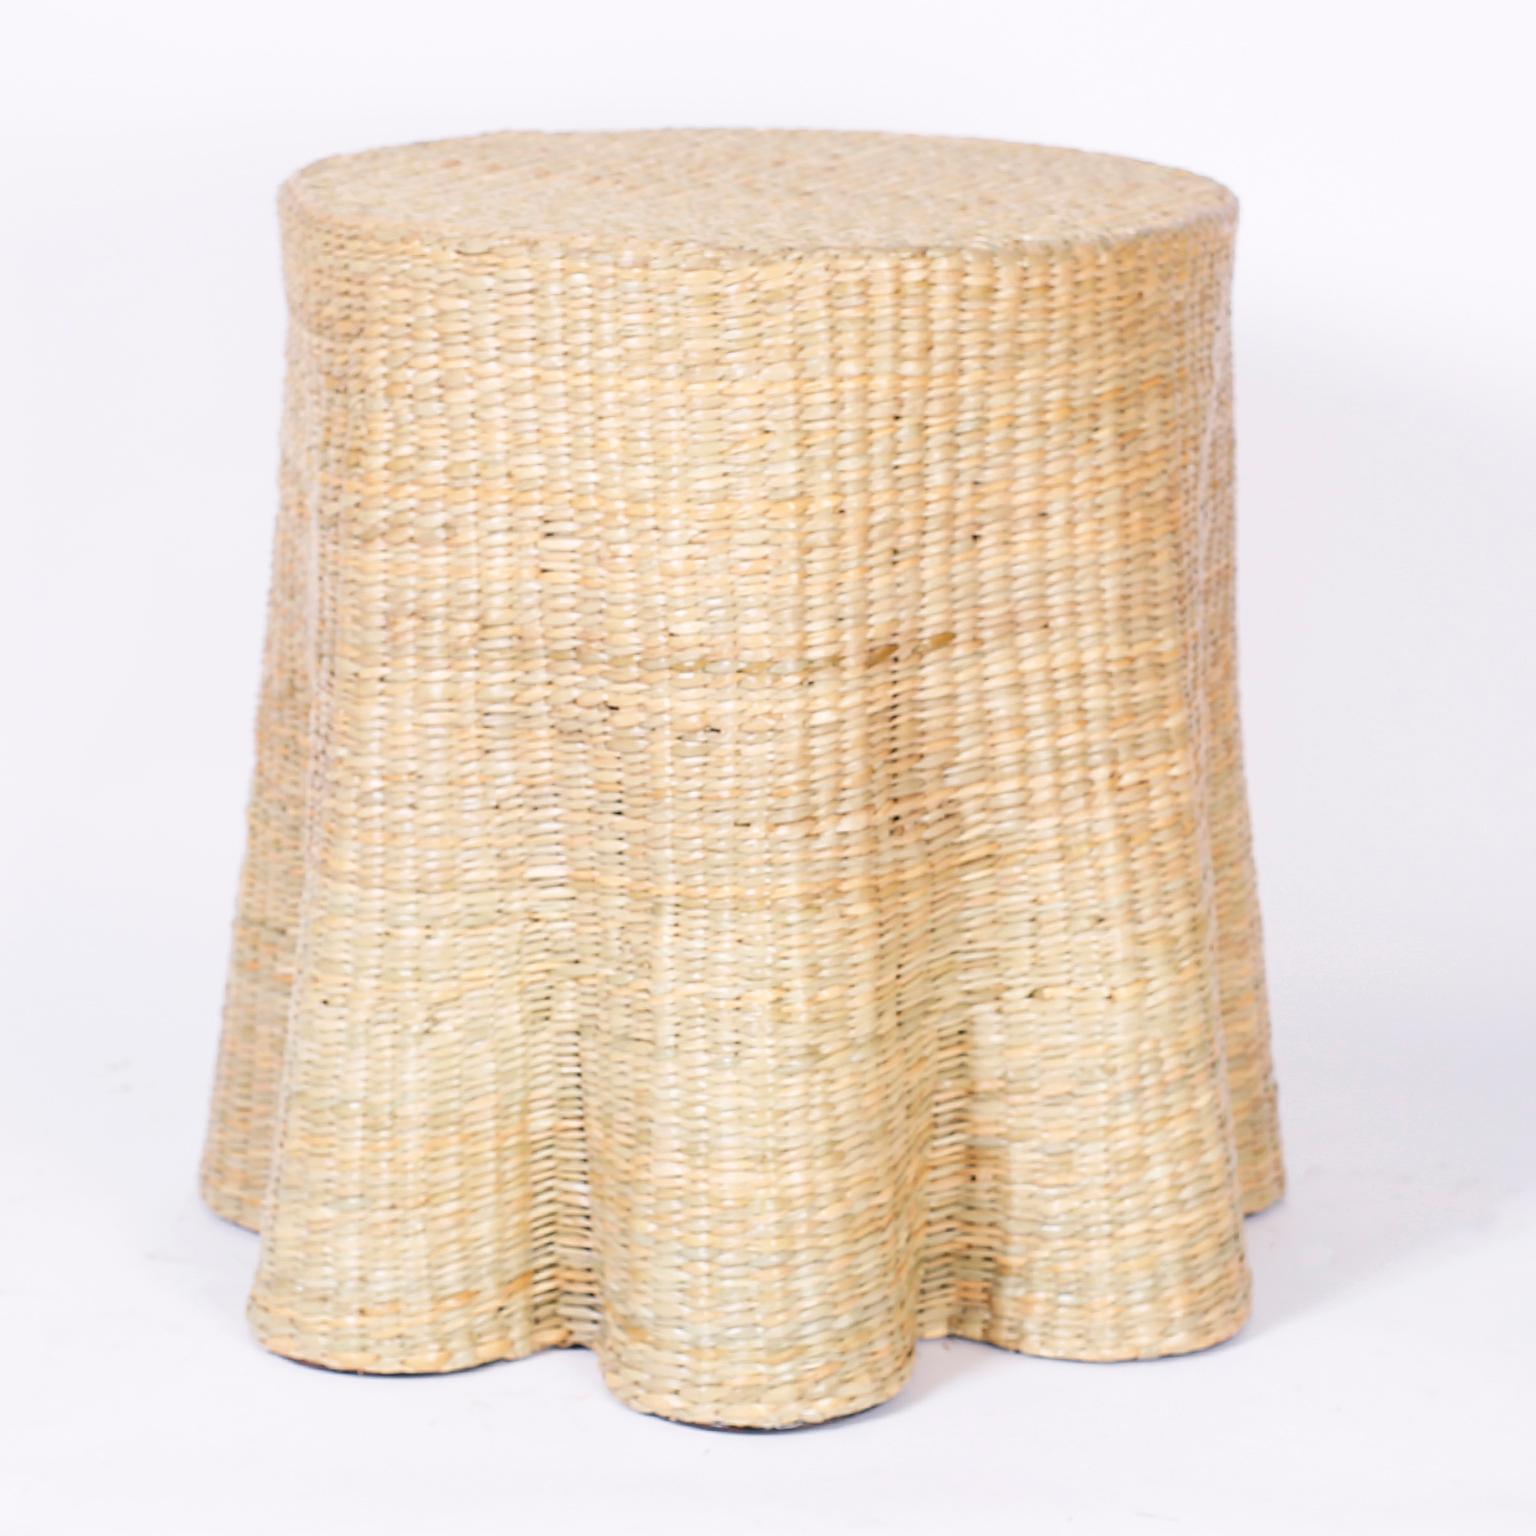 Mexican Pair of Wicker Drapery Ghost Tables or Stands from the FS Flores Collection